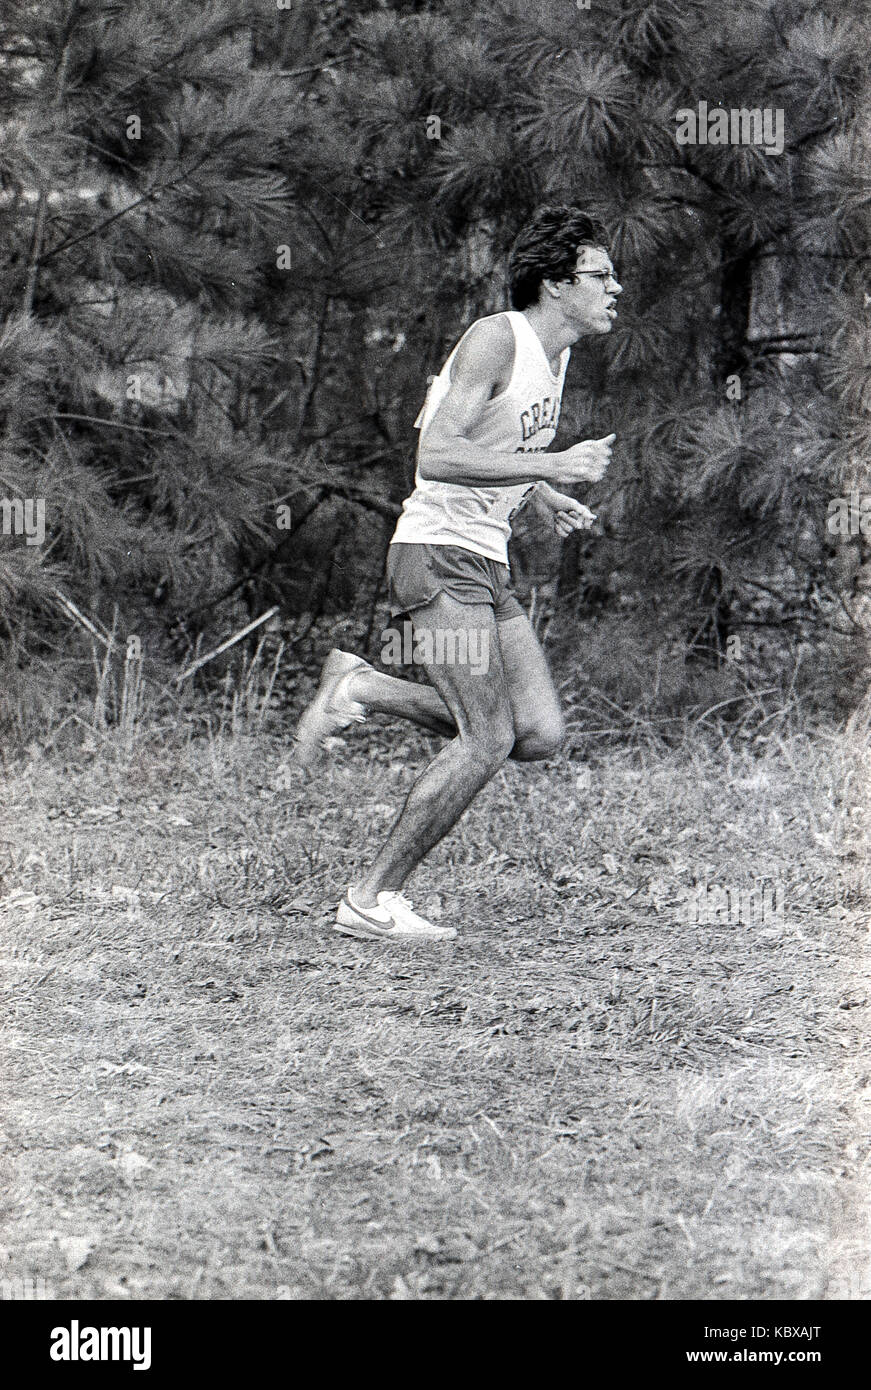 Dan Dillon competing in the 1979 AAU Cross Country Championships. Stock Photo